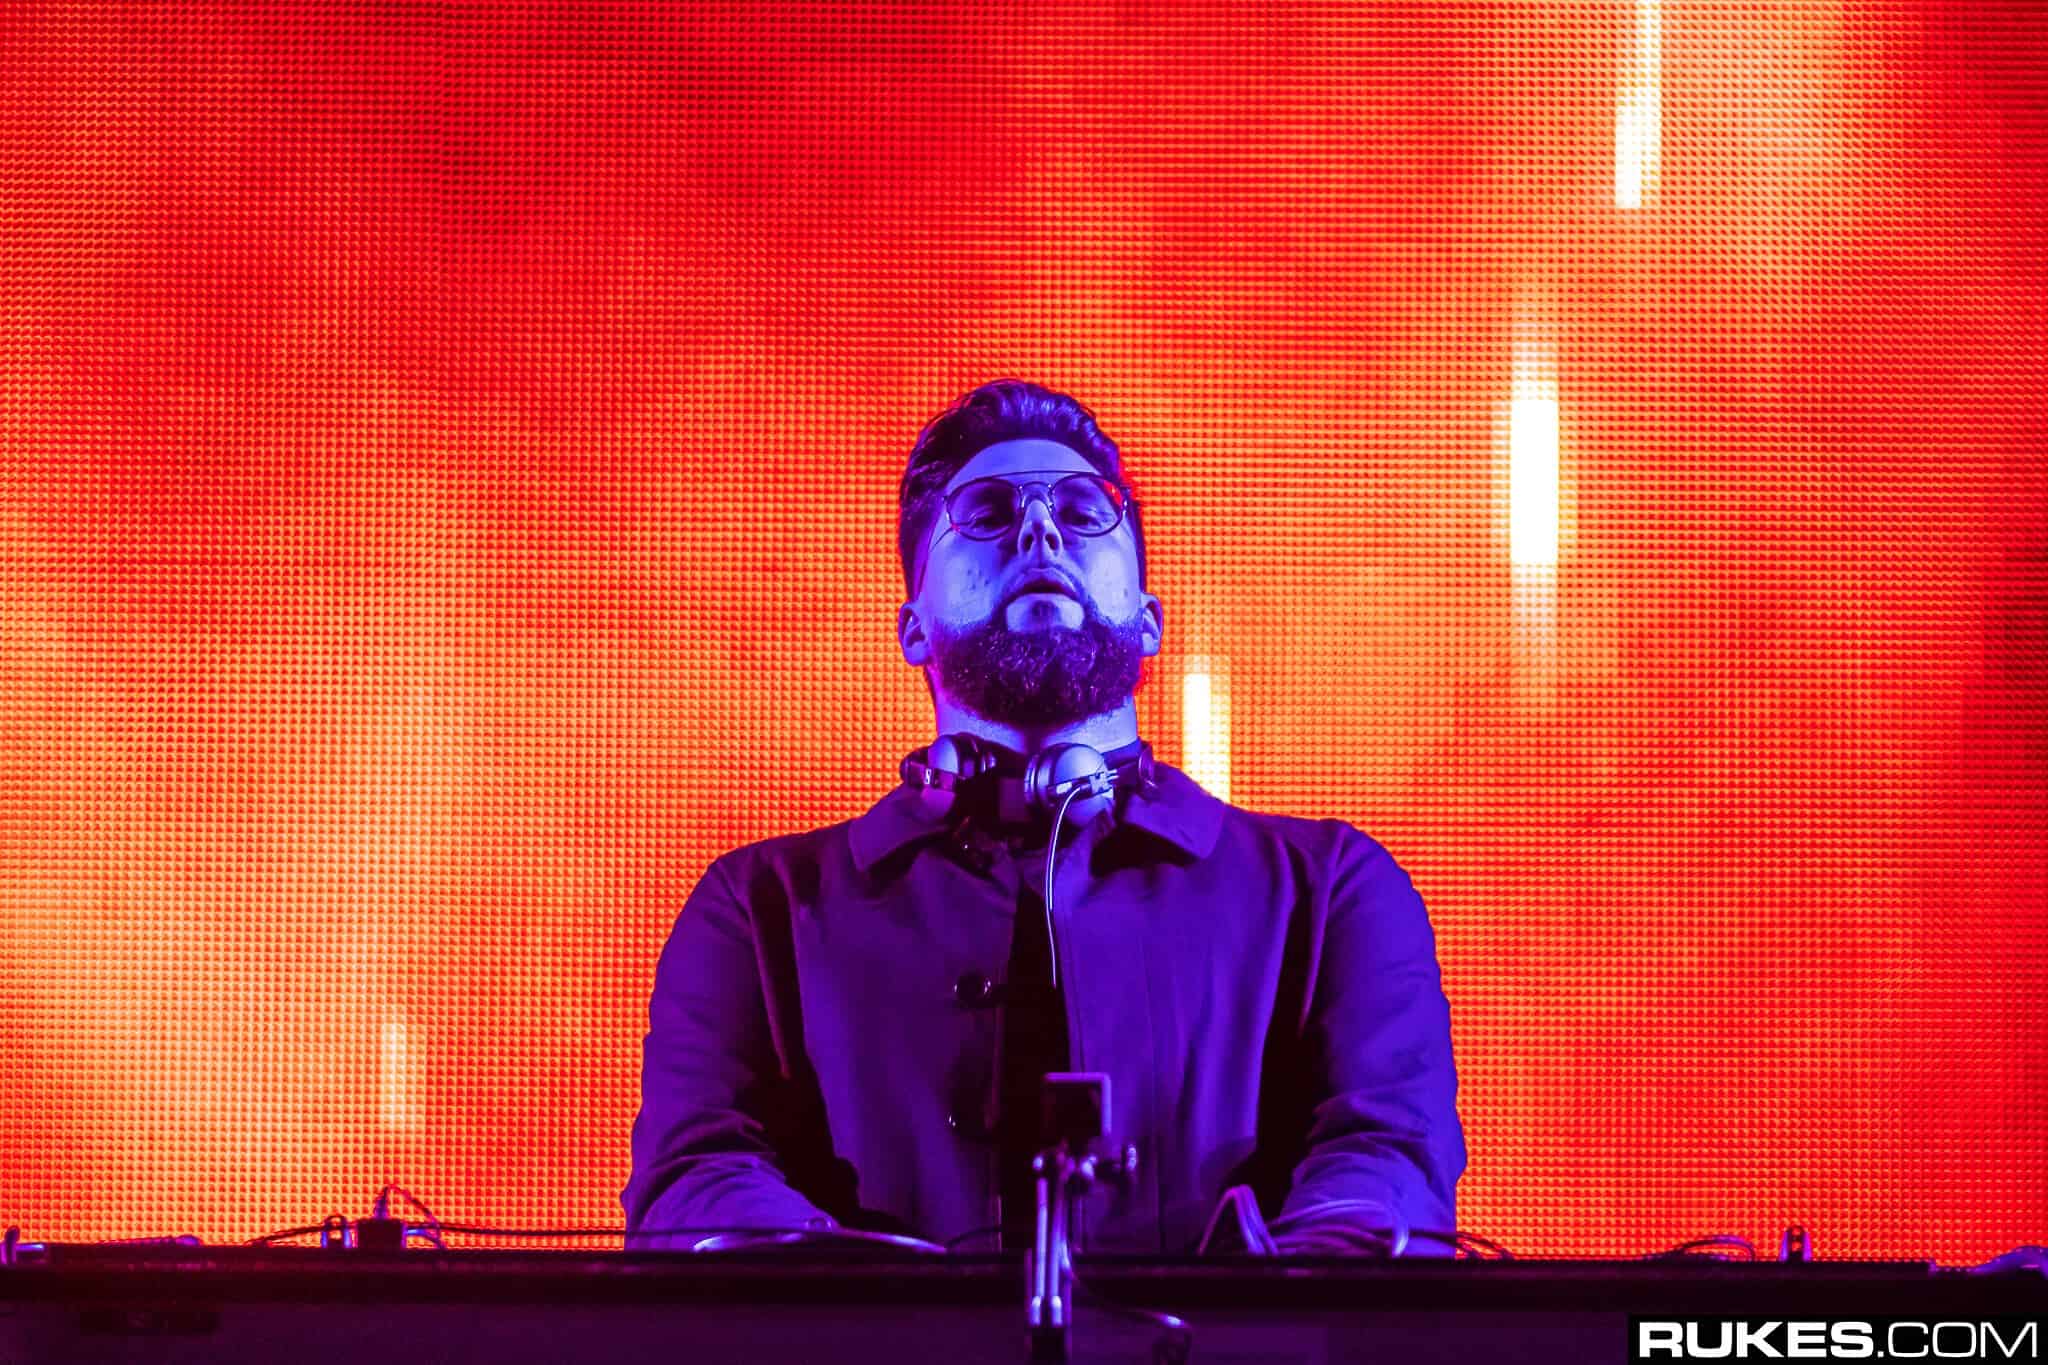 Tchami ups his game with ‘The Elevation Sunrise’ from Miami skyscraper: Watch